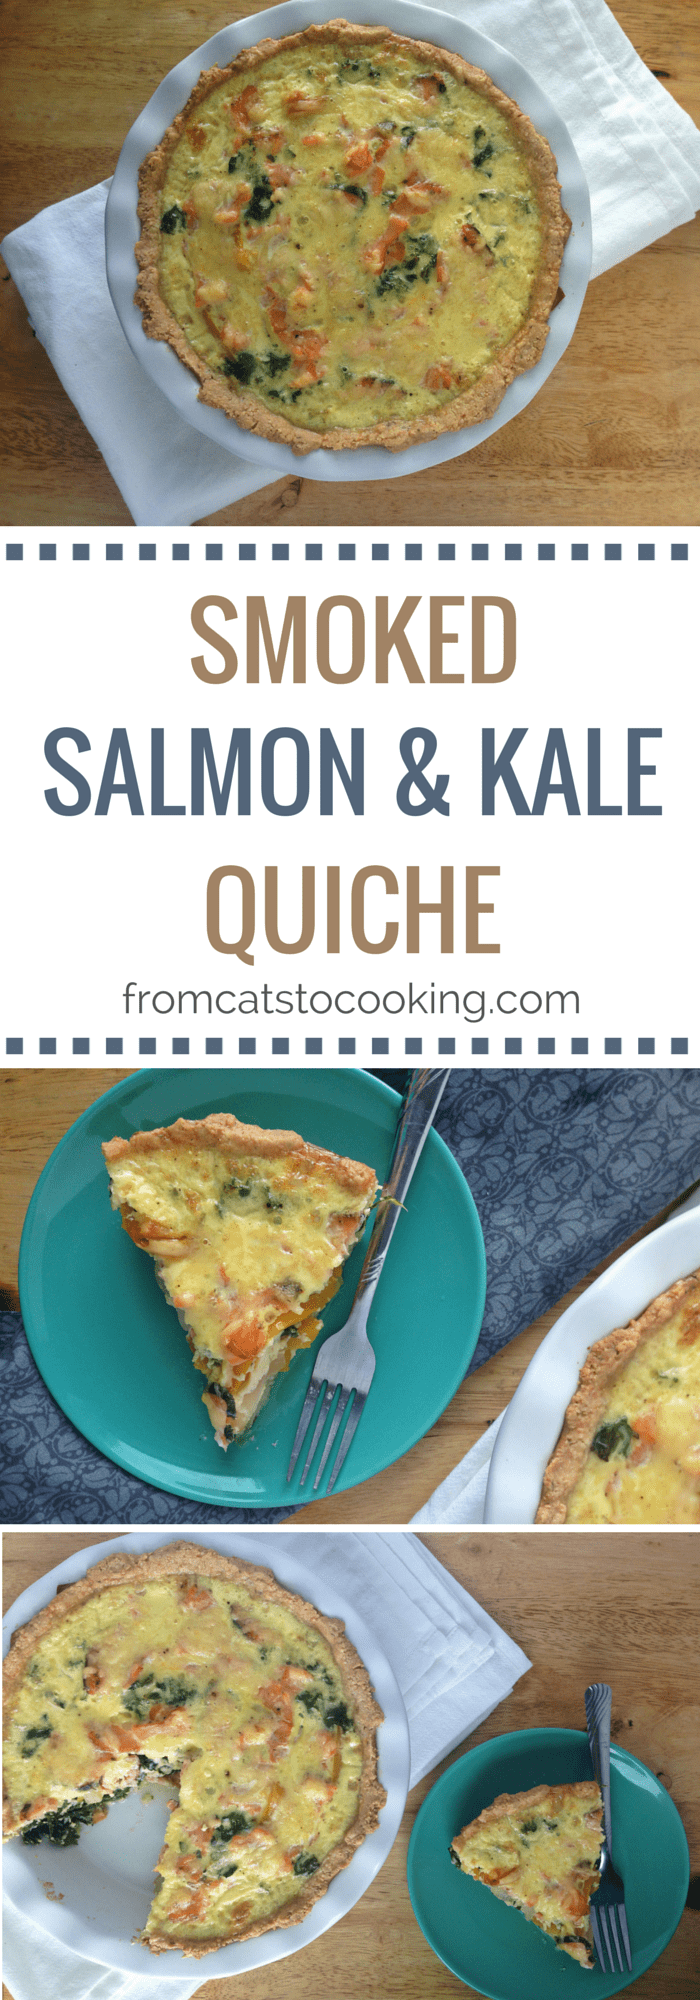 Smoked Salmon and Kale Quiche Recipe - gluten free, paleo, and can easily be made dairy free by simply omitting the cheese!  Perfect for breakfast or brunch!